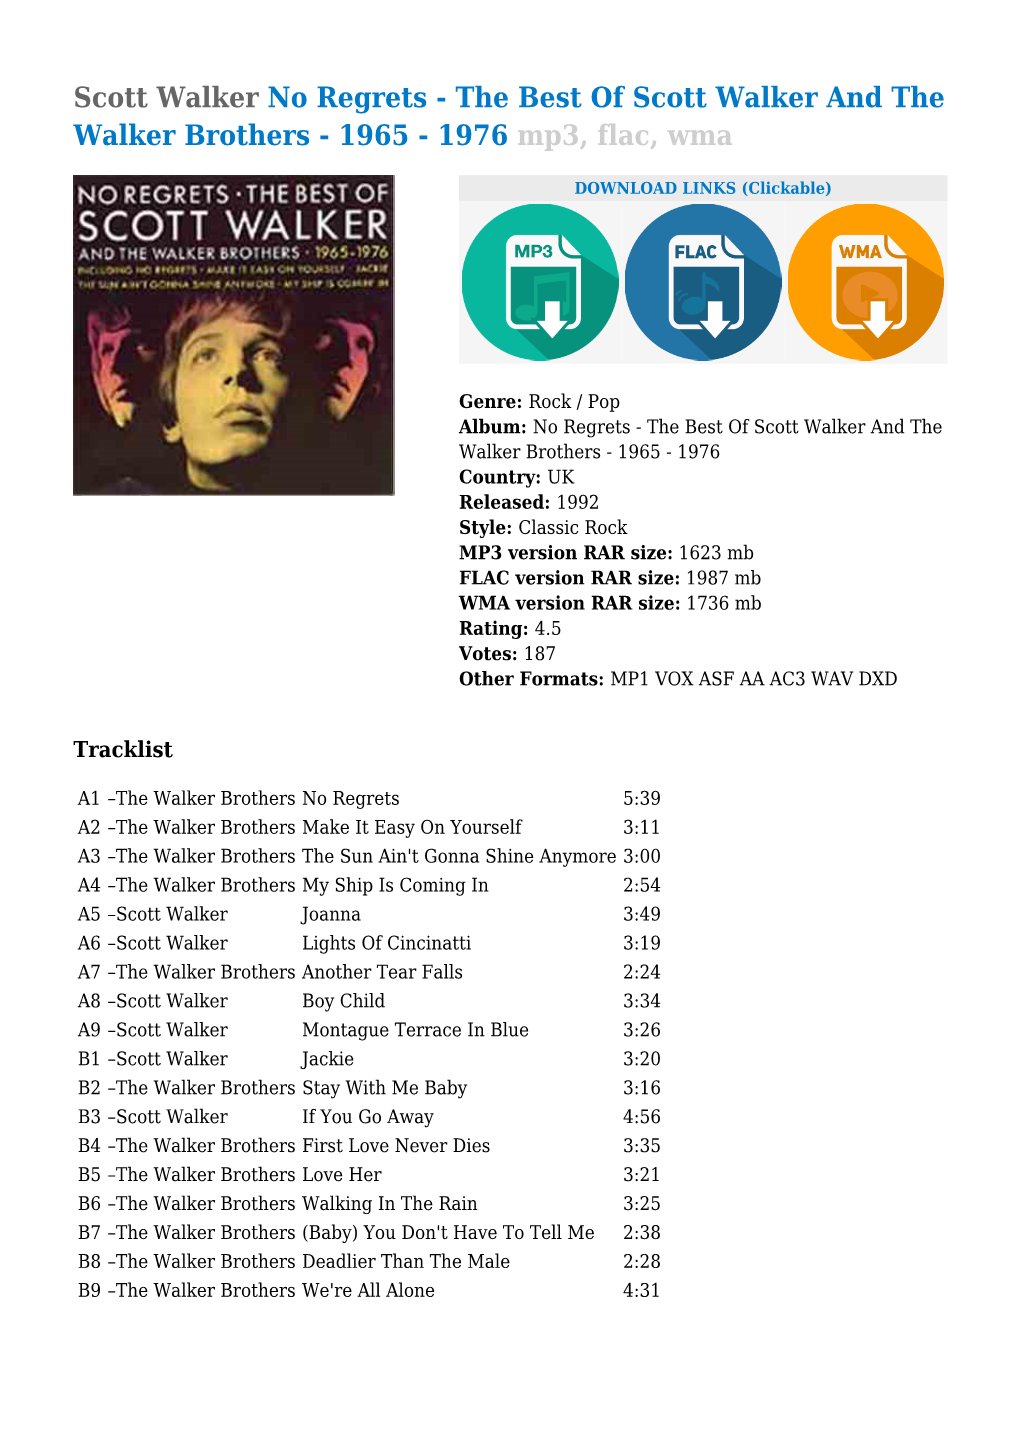 Scott Walker and the Walker Brothers - 1965 - 1976 Mp3, Flac, Wma